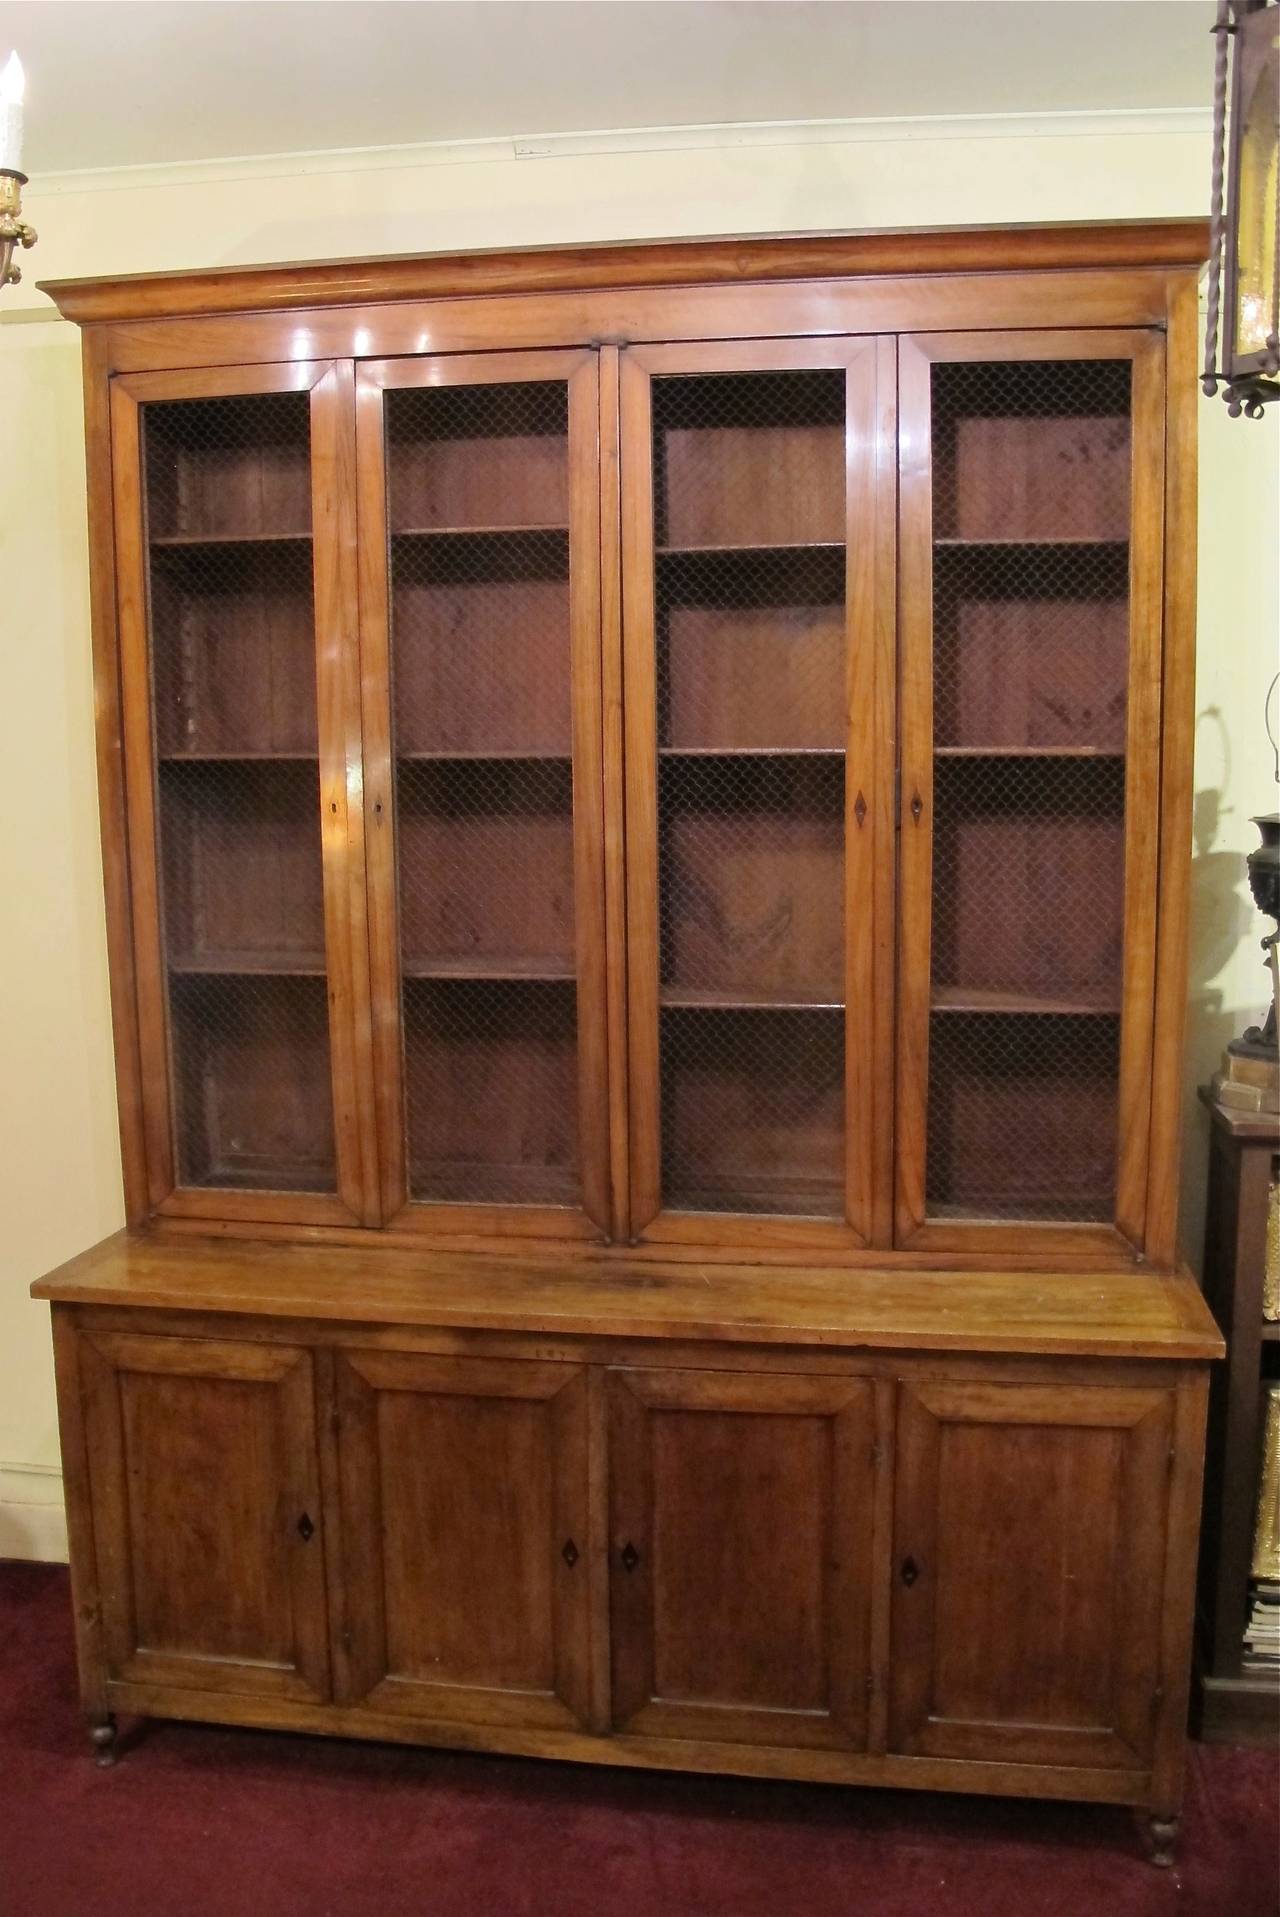 Directoire Caucasian wingnut (walnut) bookcase. Upper section with pair of double doors with brass wire mesh and three adjustable shelves. The lower section with a pair of recessed panel doors in the center flanked by single door cabinets. All doors